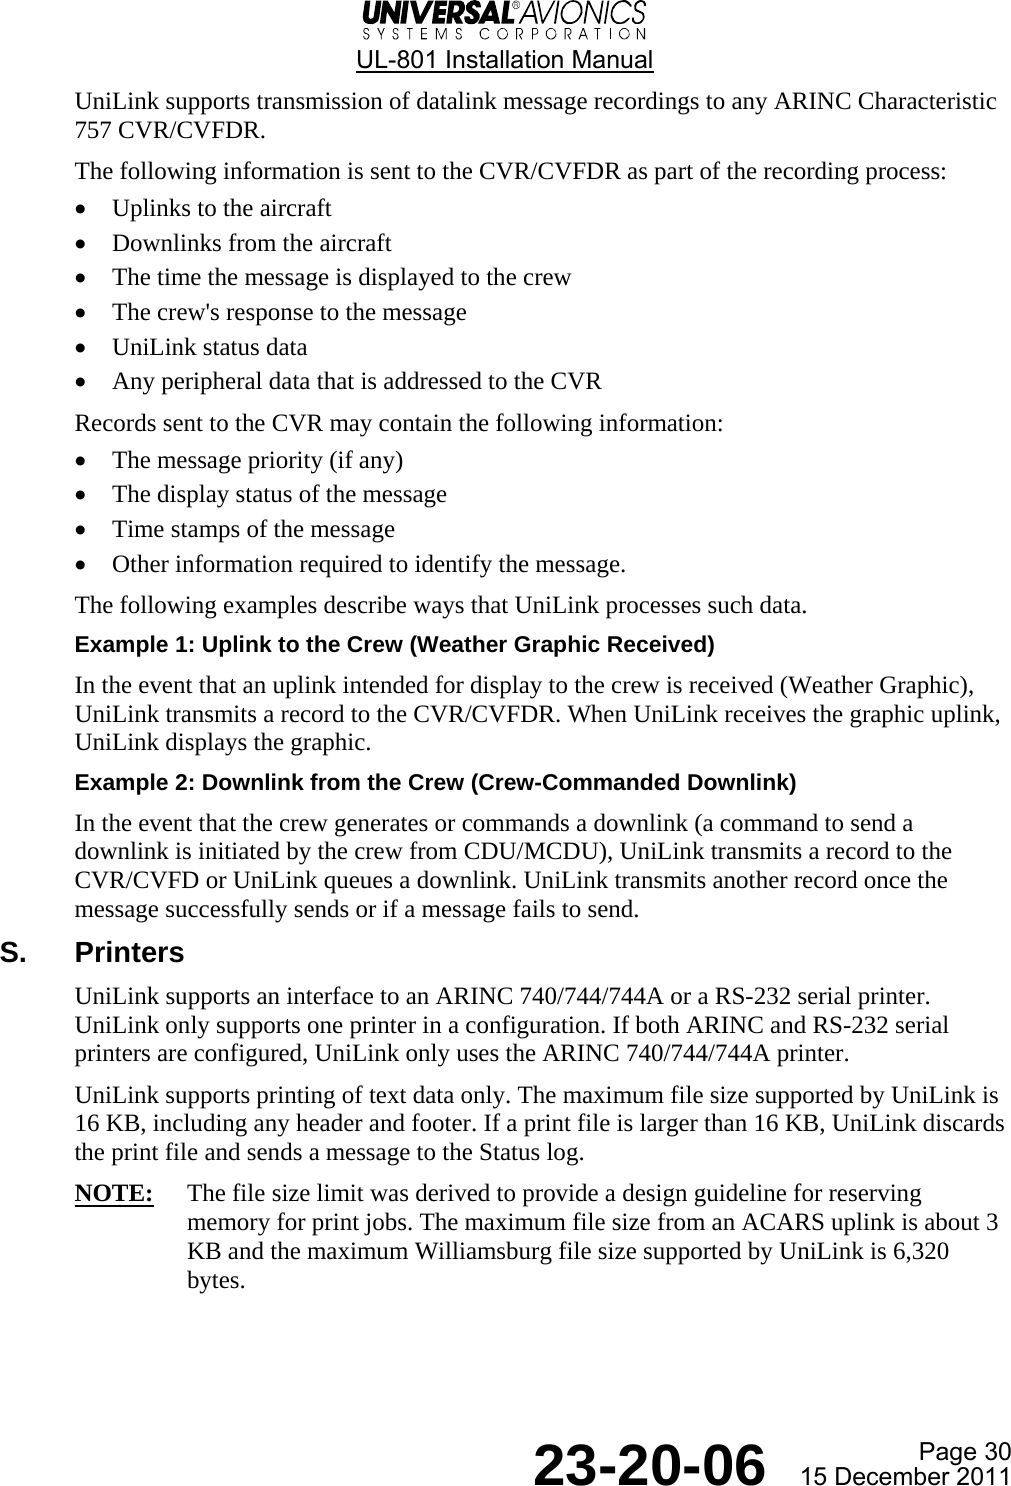  UL-801 Installation Manual  Page 30  23-20-06  15 December 2011 UniLink supports transmission of datalink message recordings to any ARINC Characteristic 757 CVR/CVFDR. The following information is sent to the CVR/CVFDR as part of the recording process: • Uplinks to the aircraft • Downlinks from the aircraft • The time the message is displayed to the crew • The crew&apos;s response to the message • UniLink status data • Any peripheral data that is addressed to the CVR Records sent to the CVR may contain the following information: • The message priority (if any) • The display status of the message • Time stamps of the message • Other information required to identify the message. The following examples describe ways that UniLink processes such data. Example 1: Uplink to the Crew (Weather Graphic Received) In the event that an uplink intended for display to the crew is received (Weather Graphic), UniLink transmits a record to the CVR/CVFDR. When UniLink receives the graphic uplink, UniLink displays the graphic. Example 2: Downlink from the Crew (Crew-Commanded Downlink) In the event that the crew generates or commands a downlink (a command to send a downlink is initiated by the crew from CDU/MCDU), UniLink transmits a record to the CVR/CVFD or UniLink queues a downlink. UniLink transmits another record once the message successfully sends or if a message fails to send. S. Printers UniLink supports an interface to an ARINC 740/744/744A or a RS-232 serial printer. UniLink only supports one printer in a configuration. If both ARINC and RS-232 serial printers are configured, UniLink only uses the ARINC 740/744/744A printer. UniLink supports printing of text data only. The maximum file size supported by UniLink is 16 KB, including any header and footer. If a print file is larger than 16 KB, UniLink discards the print file and sends a message to the Status log. NOTE:  The file size limit was derived to provide a design guideline for reserving memory for print jobs. The maximum file size from an ACARS uplink is about 3 KB and the maximum Williamsburg file size supported by UniLink is 6,320 bytes.    